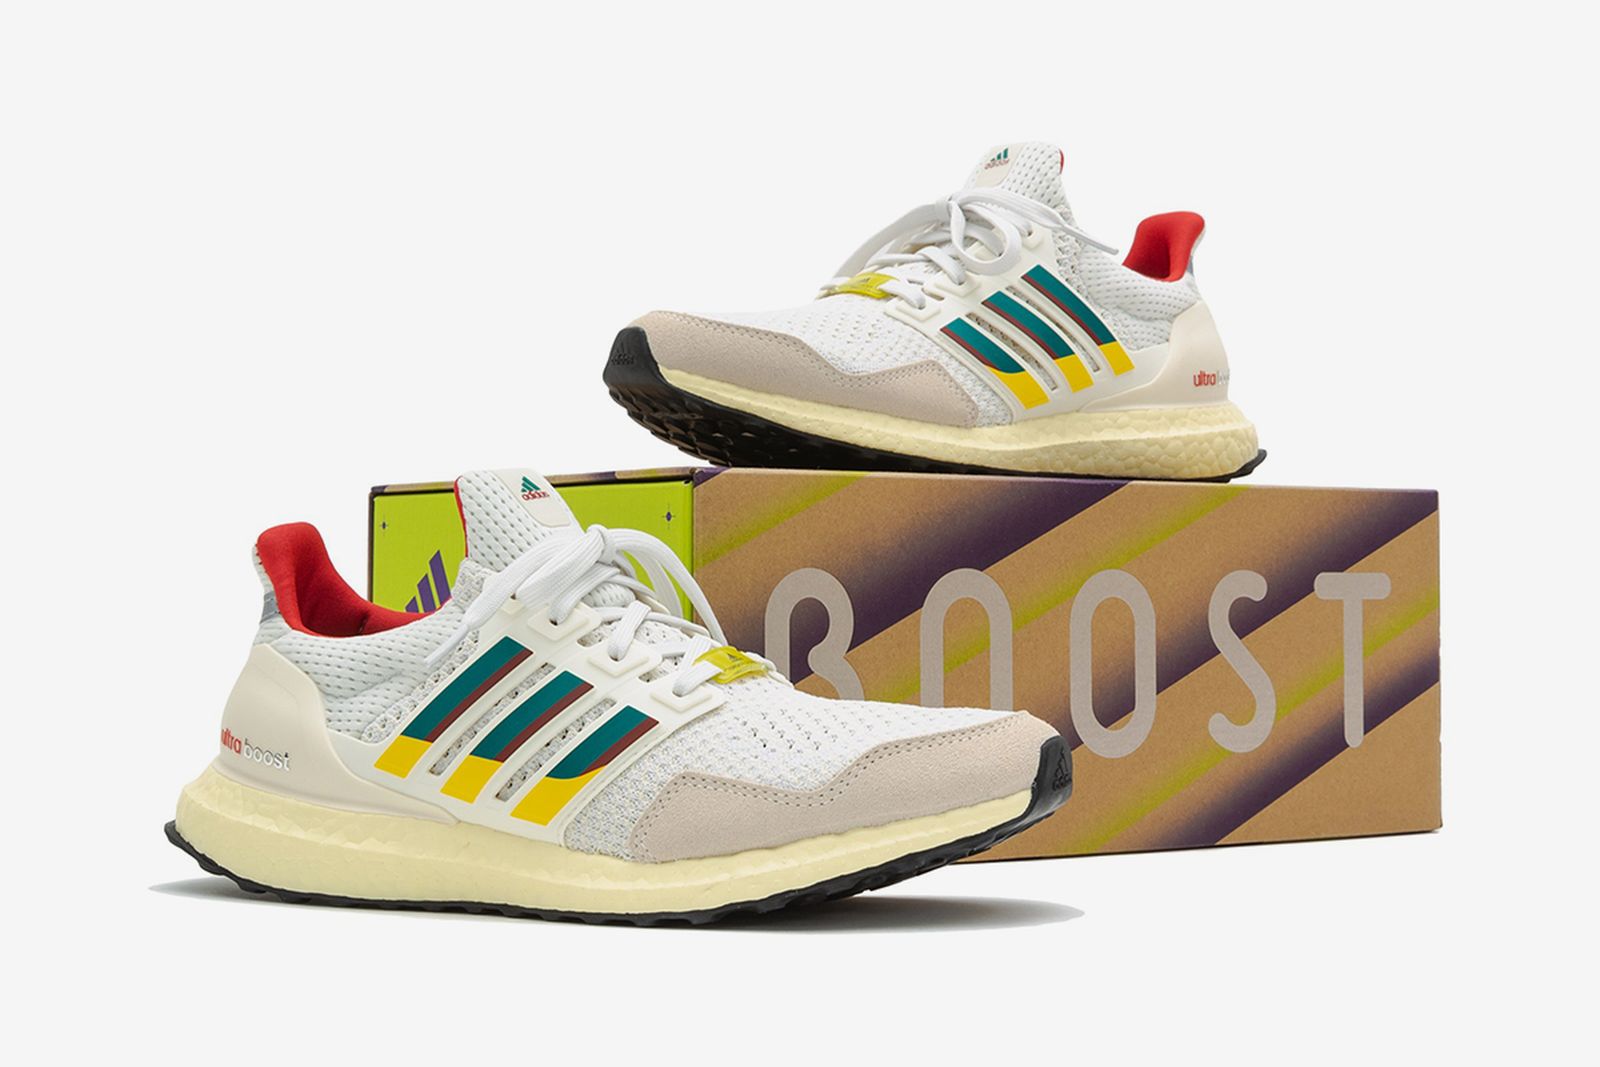 adidas-ultraboost-1-0-dna-zx-collection-release-date-price-01